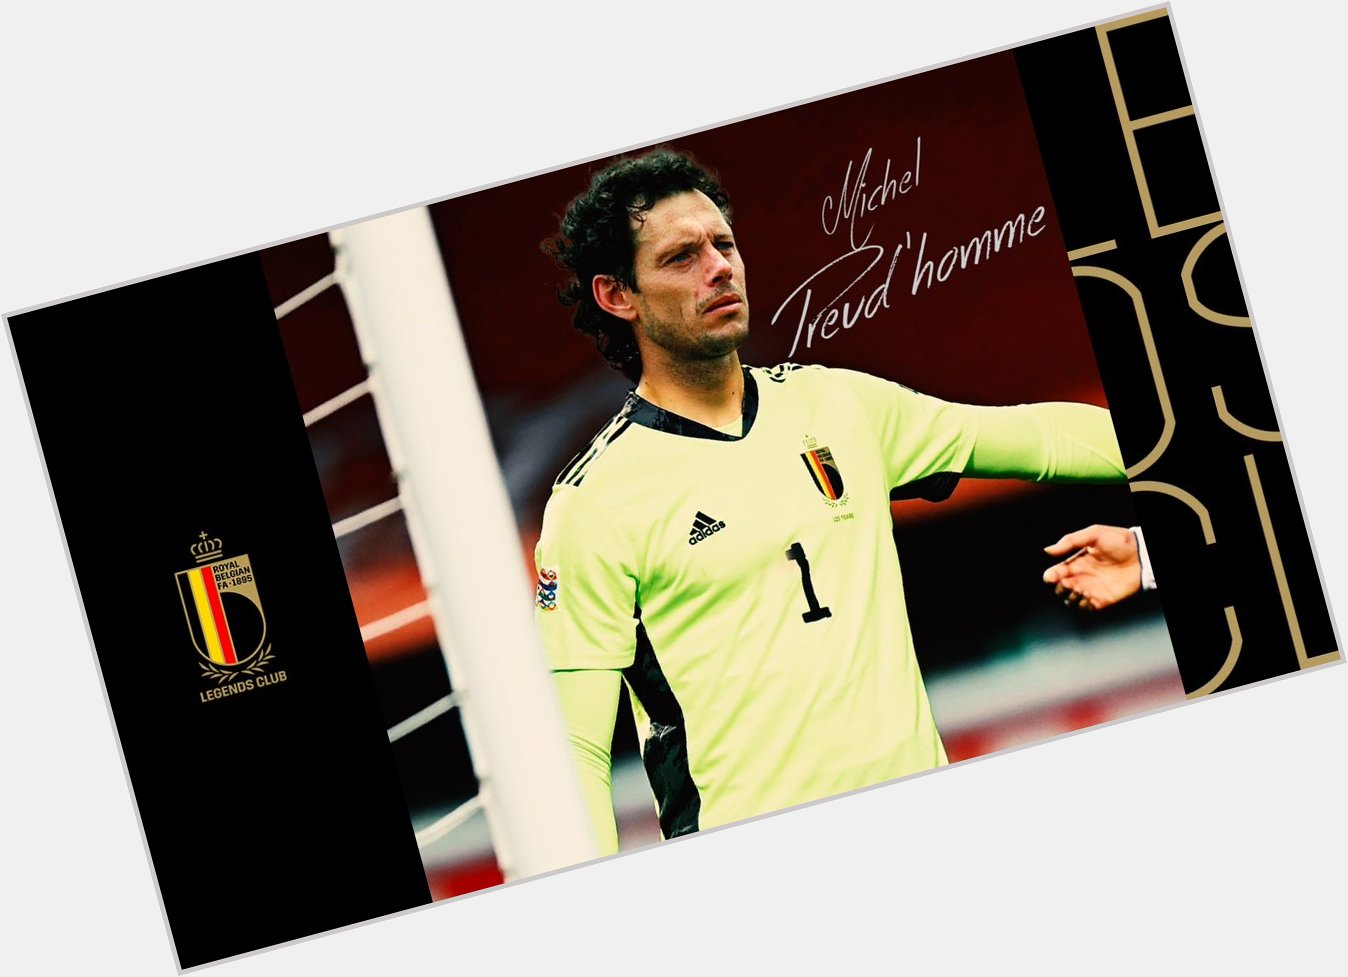 Happy 62nd Birthday to Michel Preud\homme, member of our Legends Club and 125y Icons Team!   